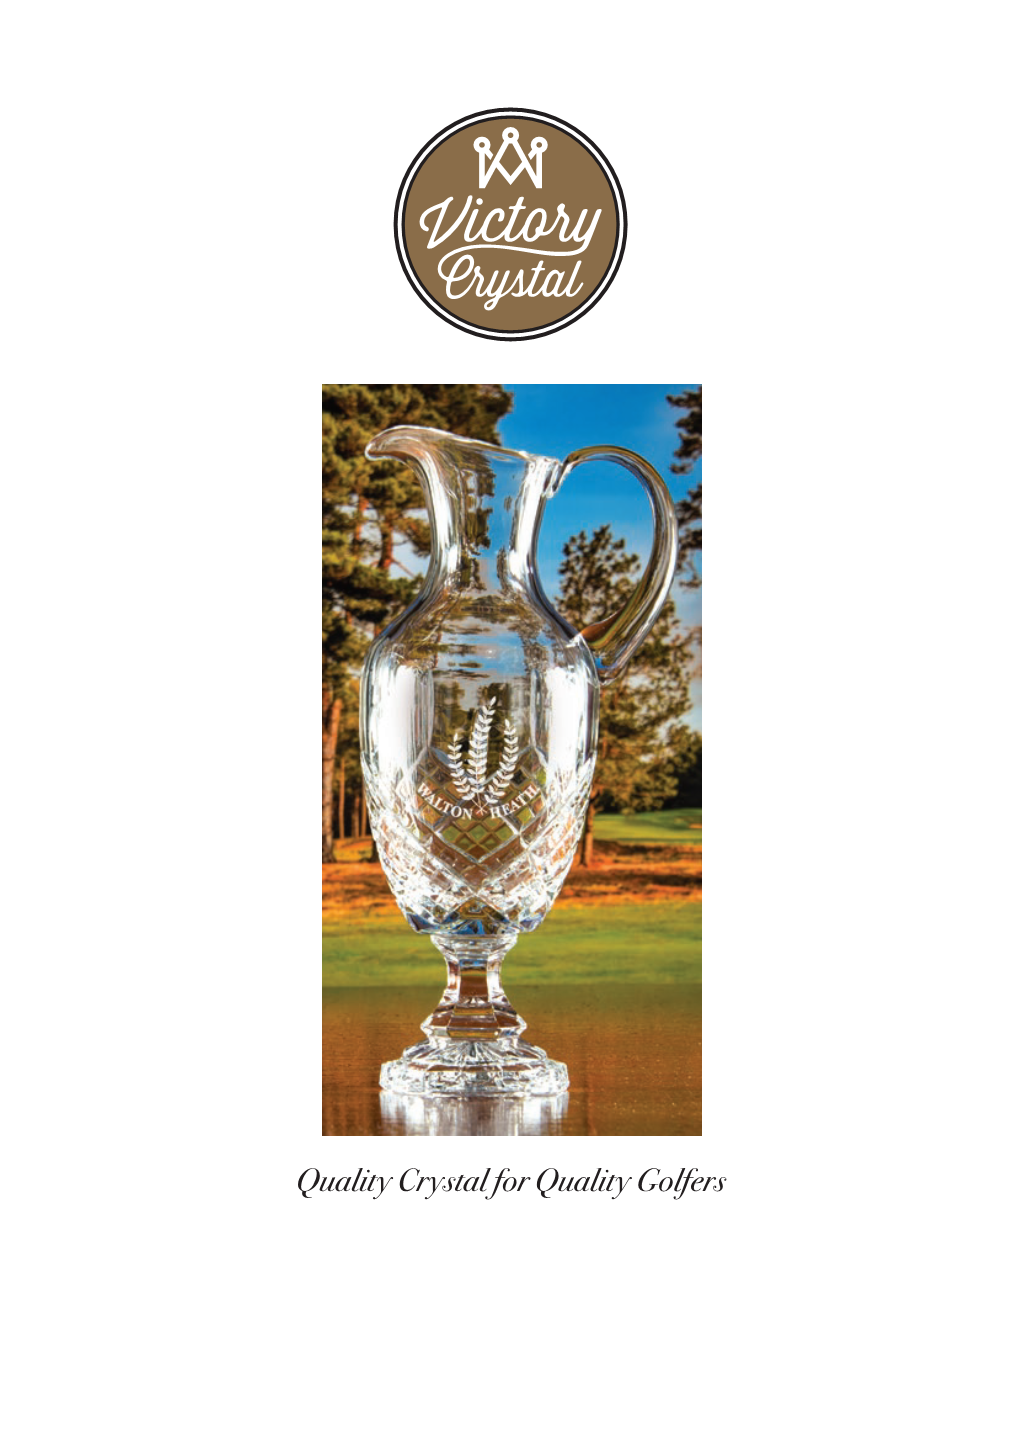 Quality Crystal for Quality Golfers 02